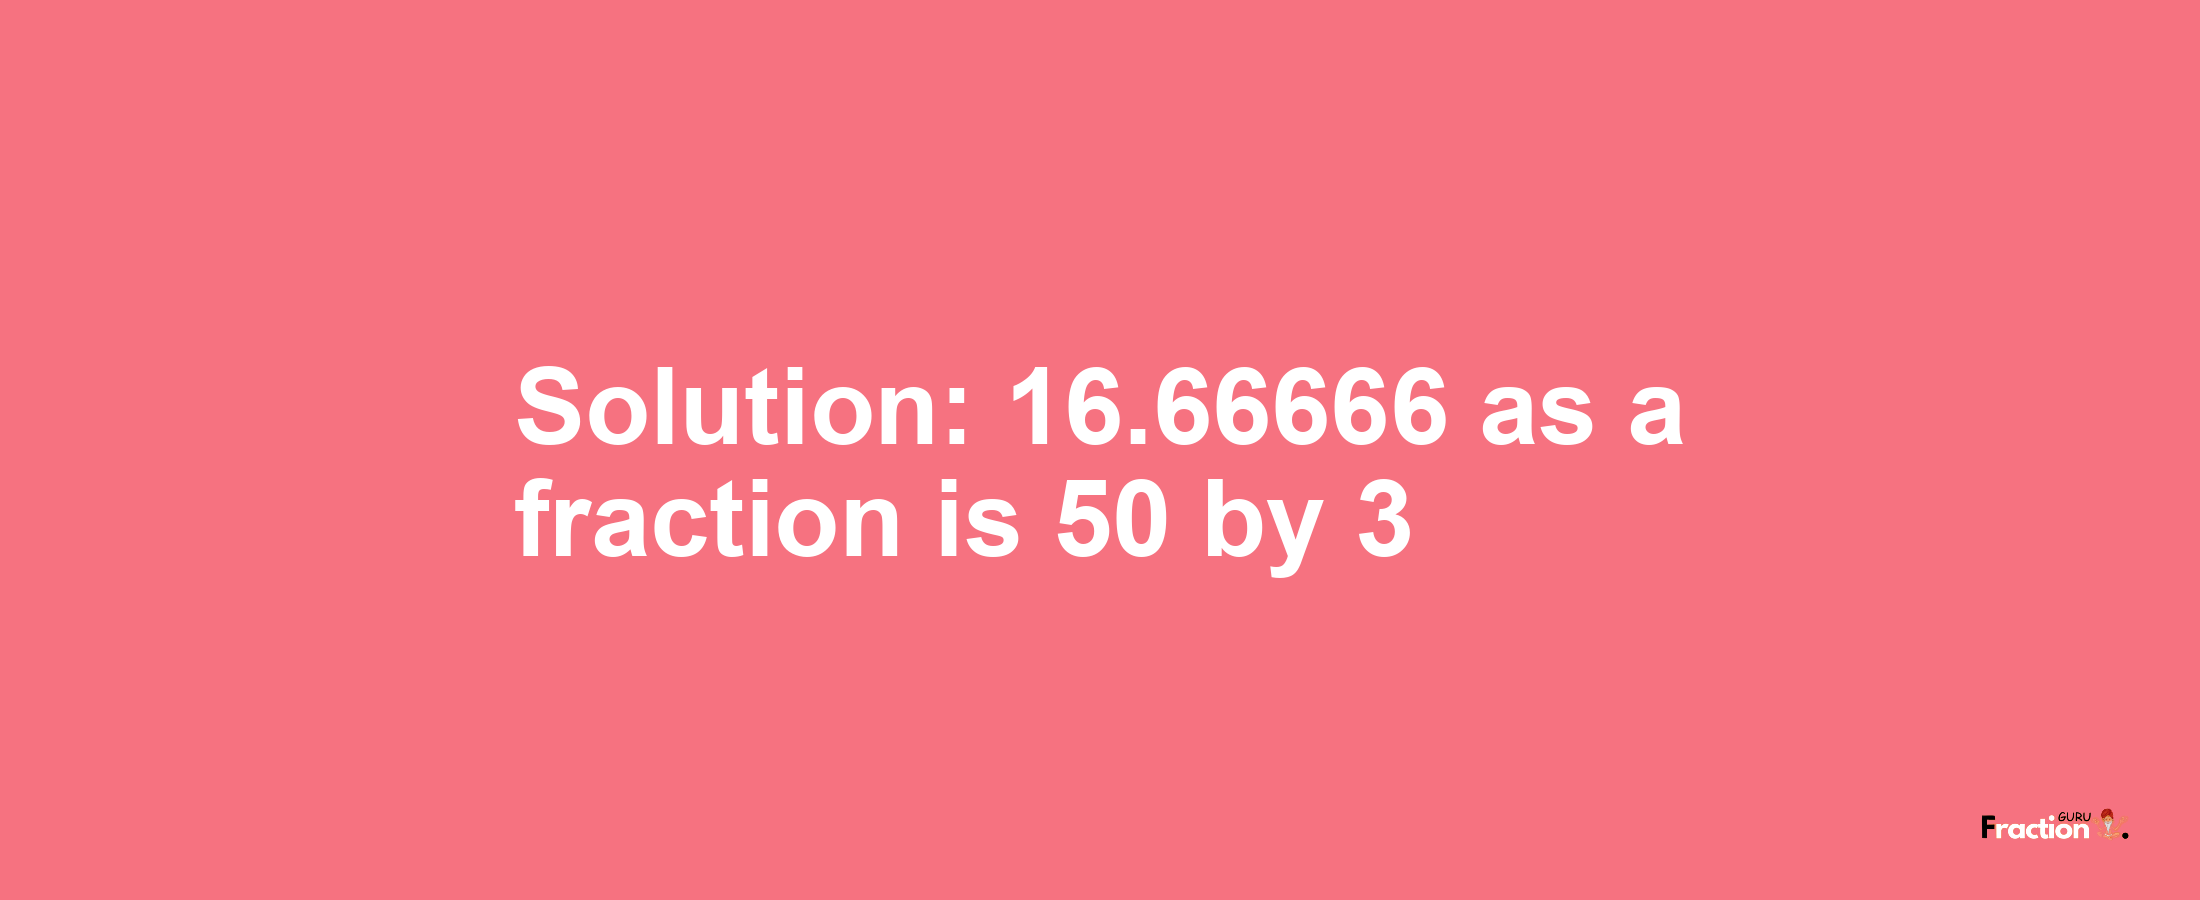 Solution:16.66666 as a fraction is 50/3